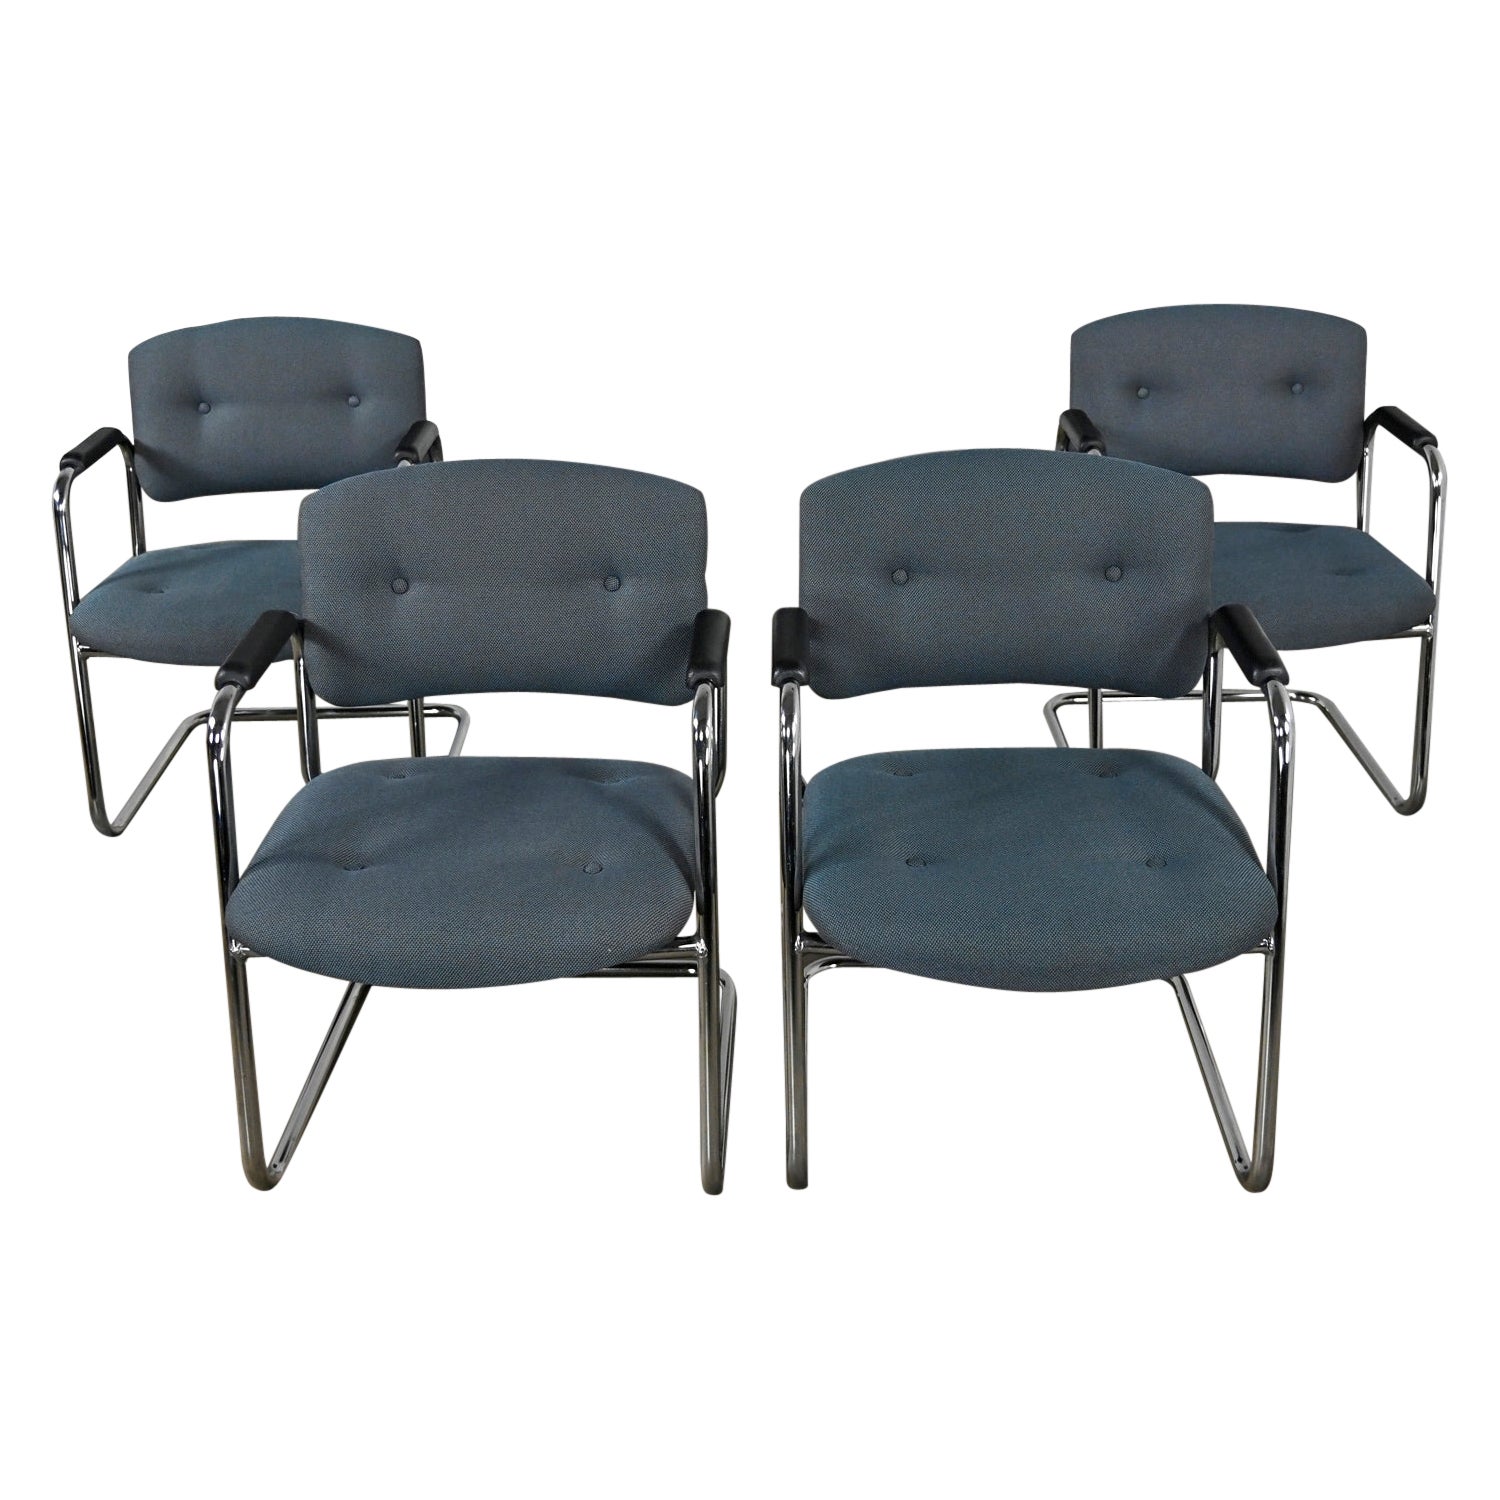 Late 20th Century Gray & Chrome Cantilever Chairs Style Steelcase Set of 4